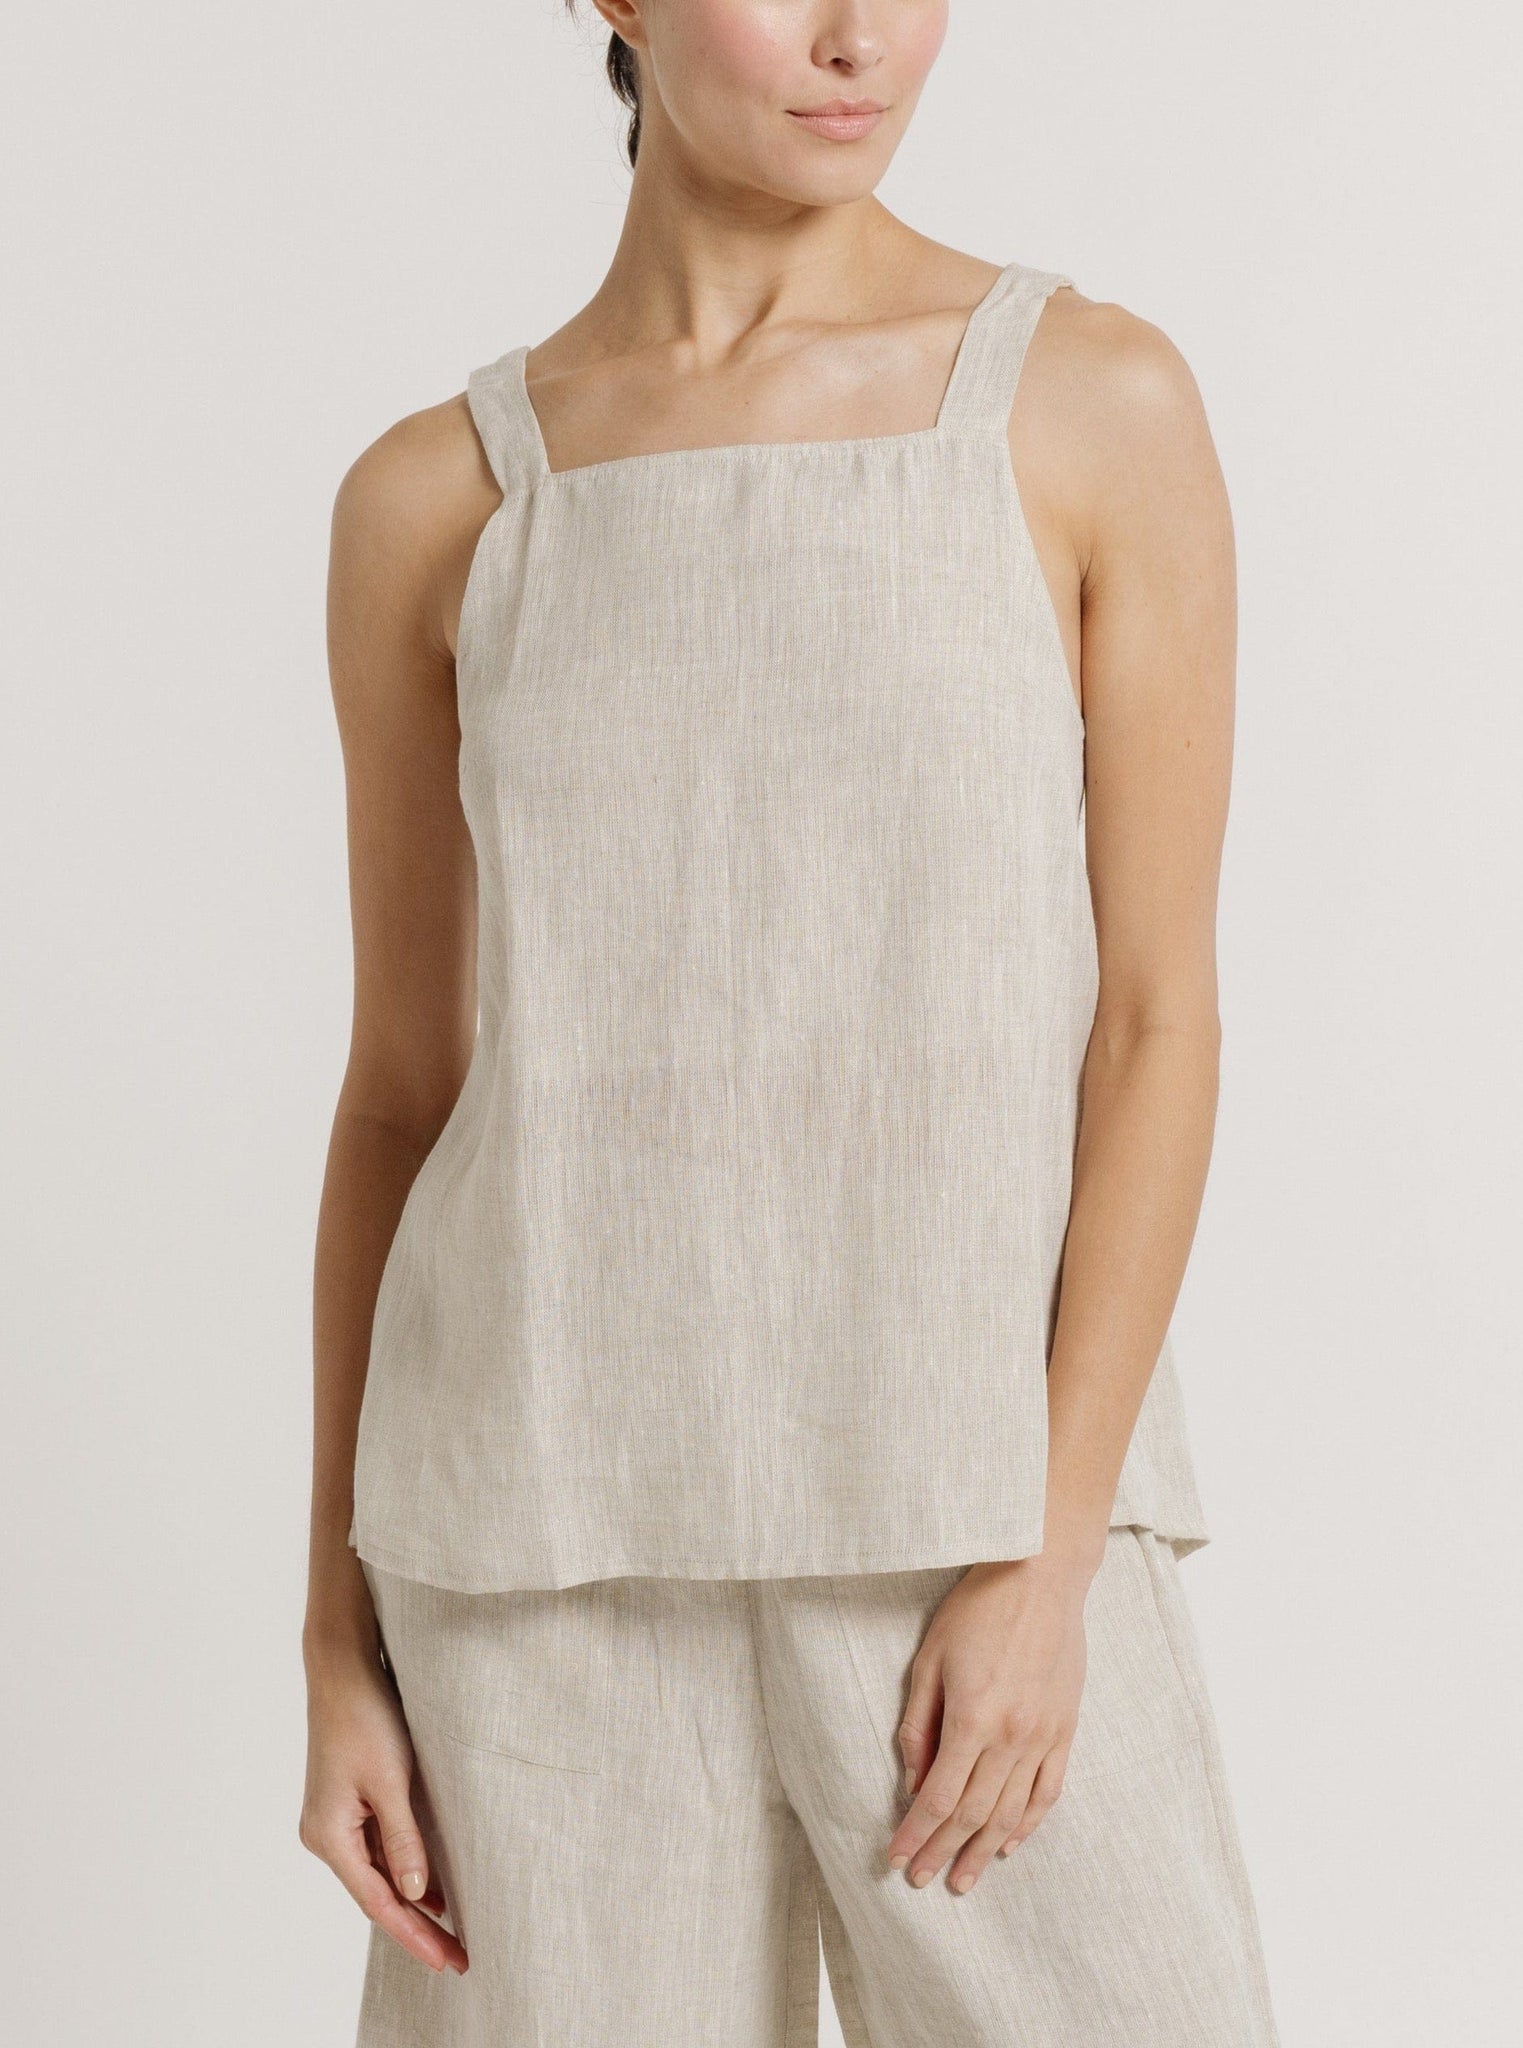 A woman sporting a Tie Back Linen Tank - Natural made of organic linen, ready for resort pre-orders.